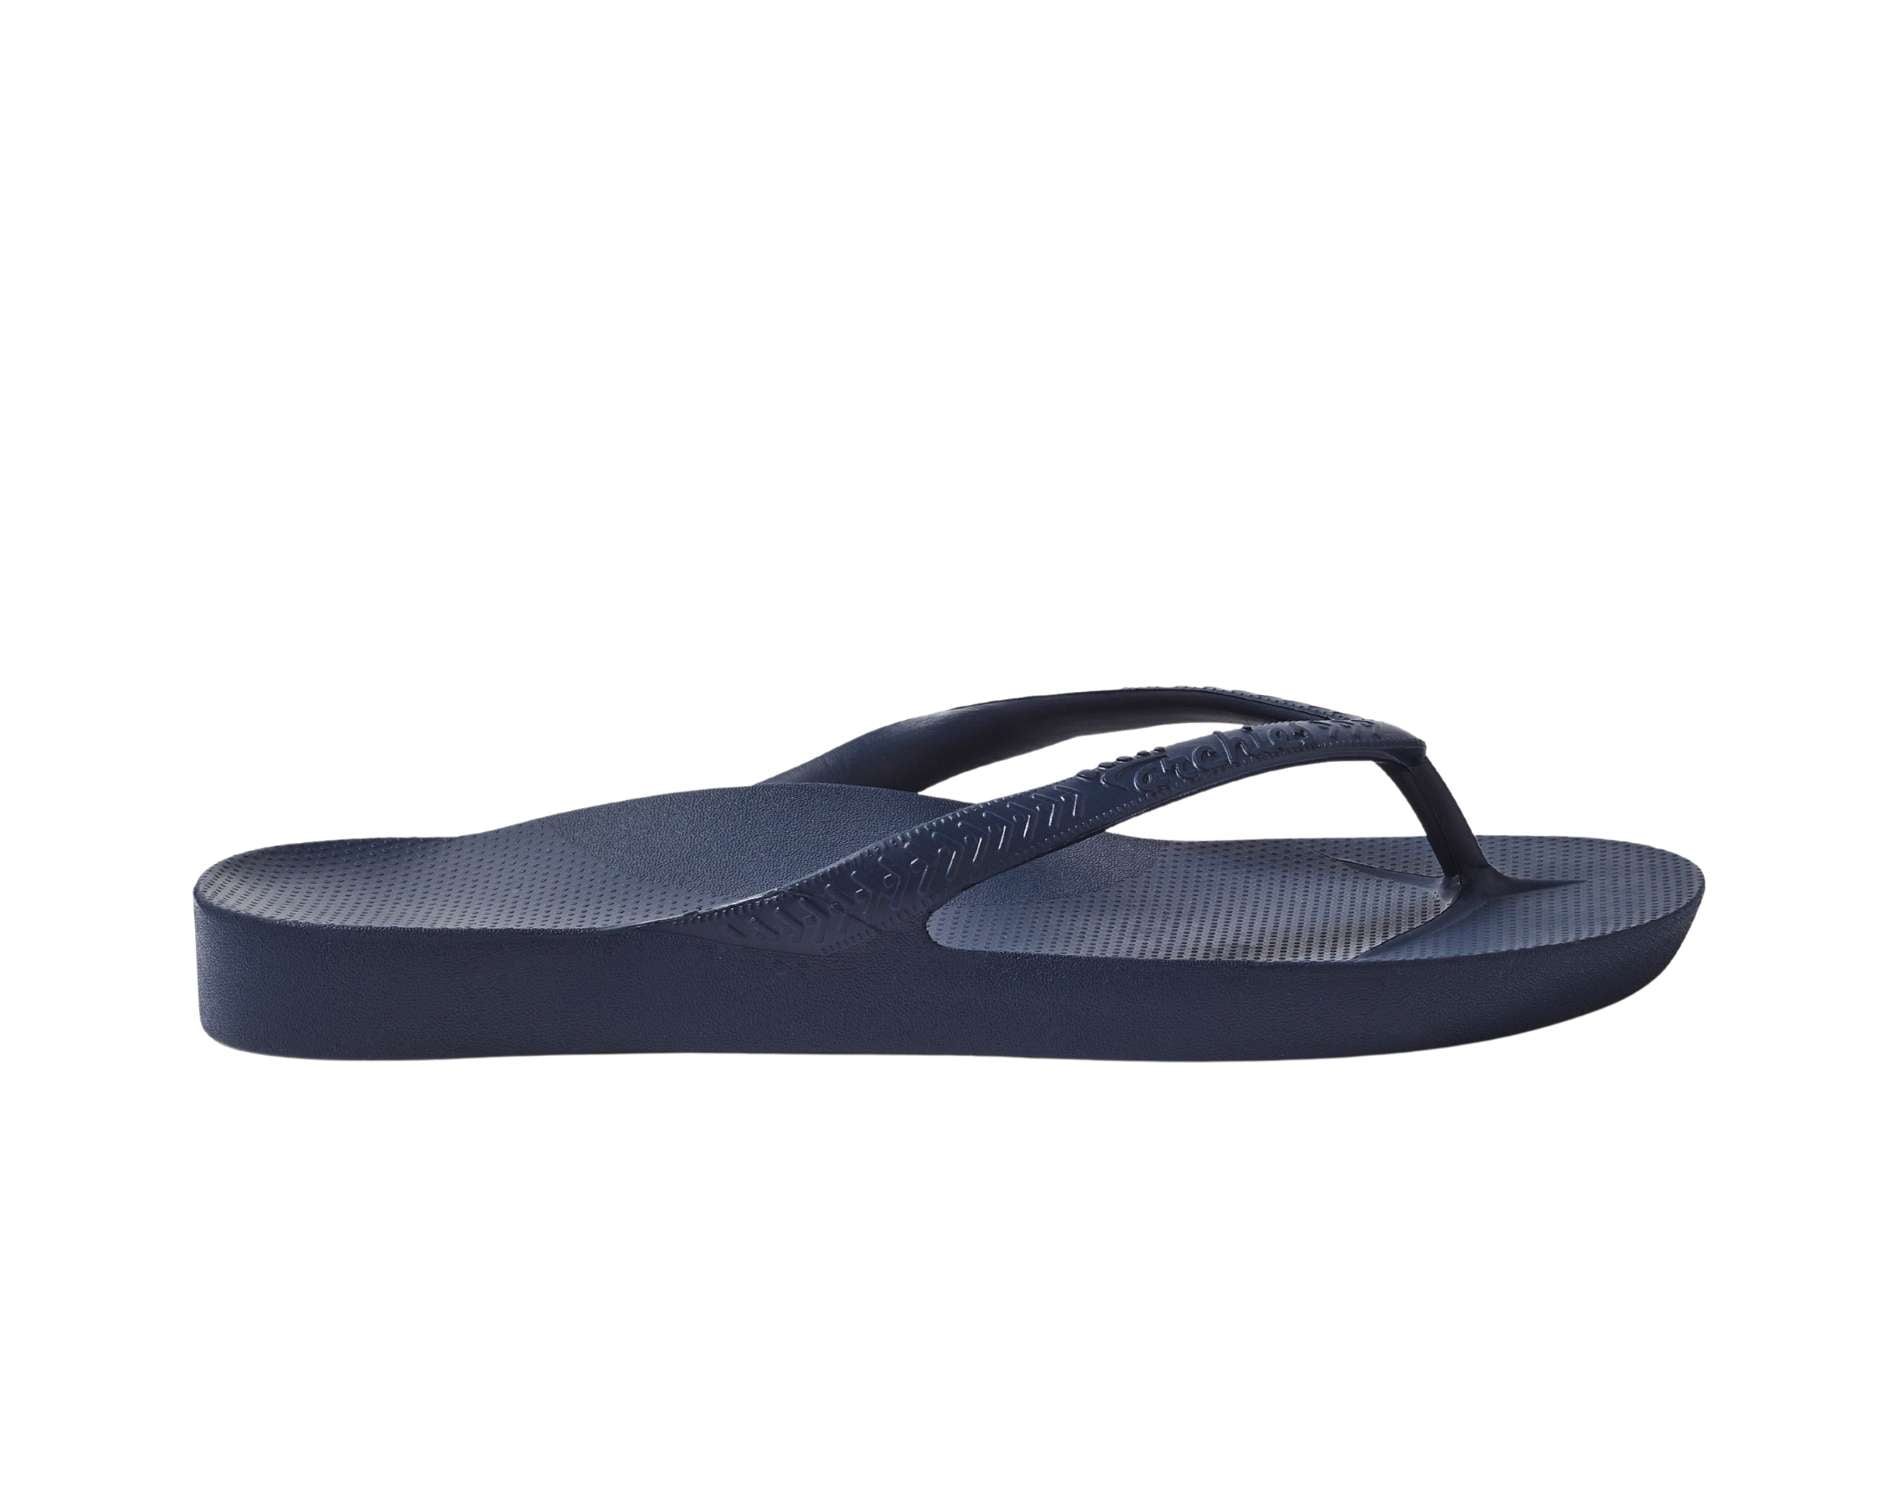 Archies arch support thongs in navy colour